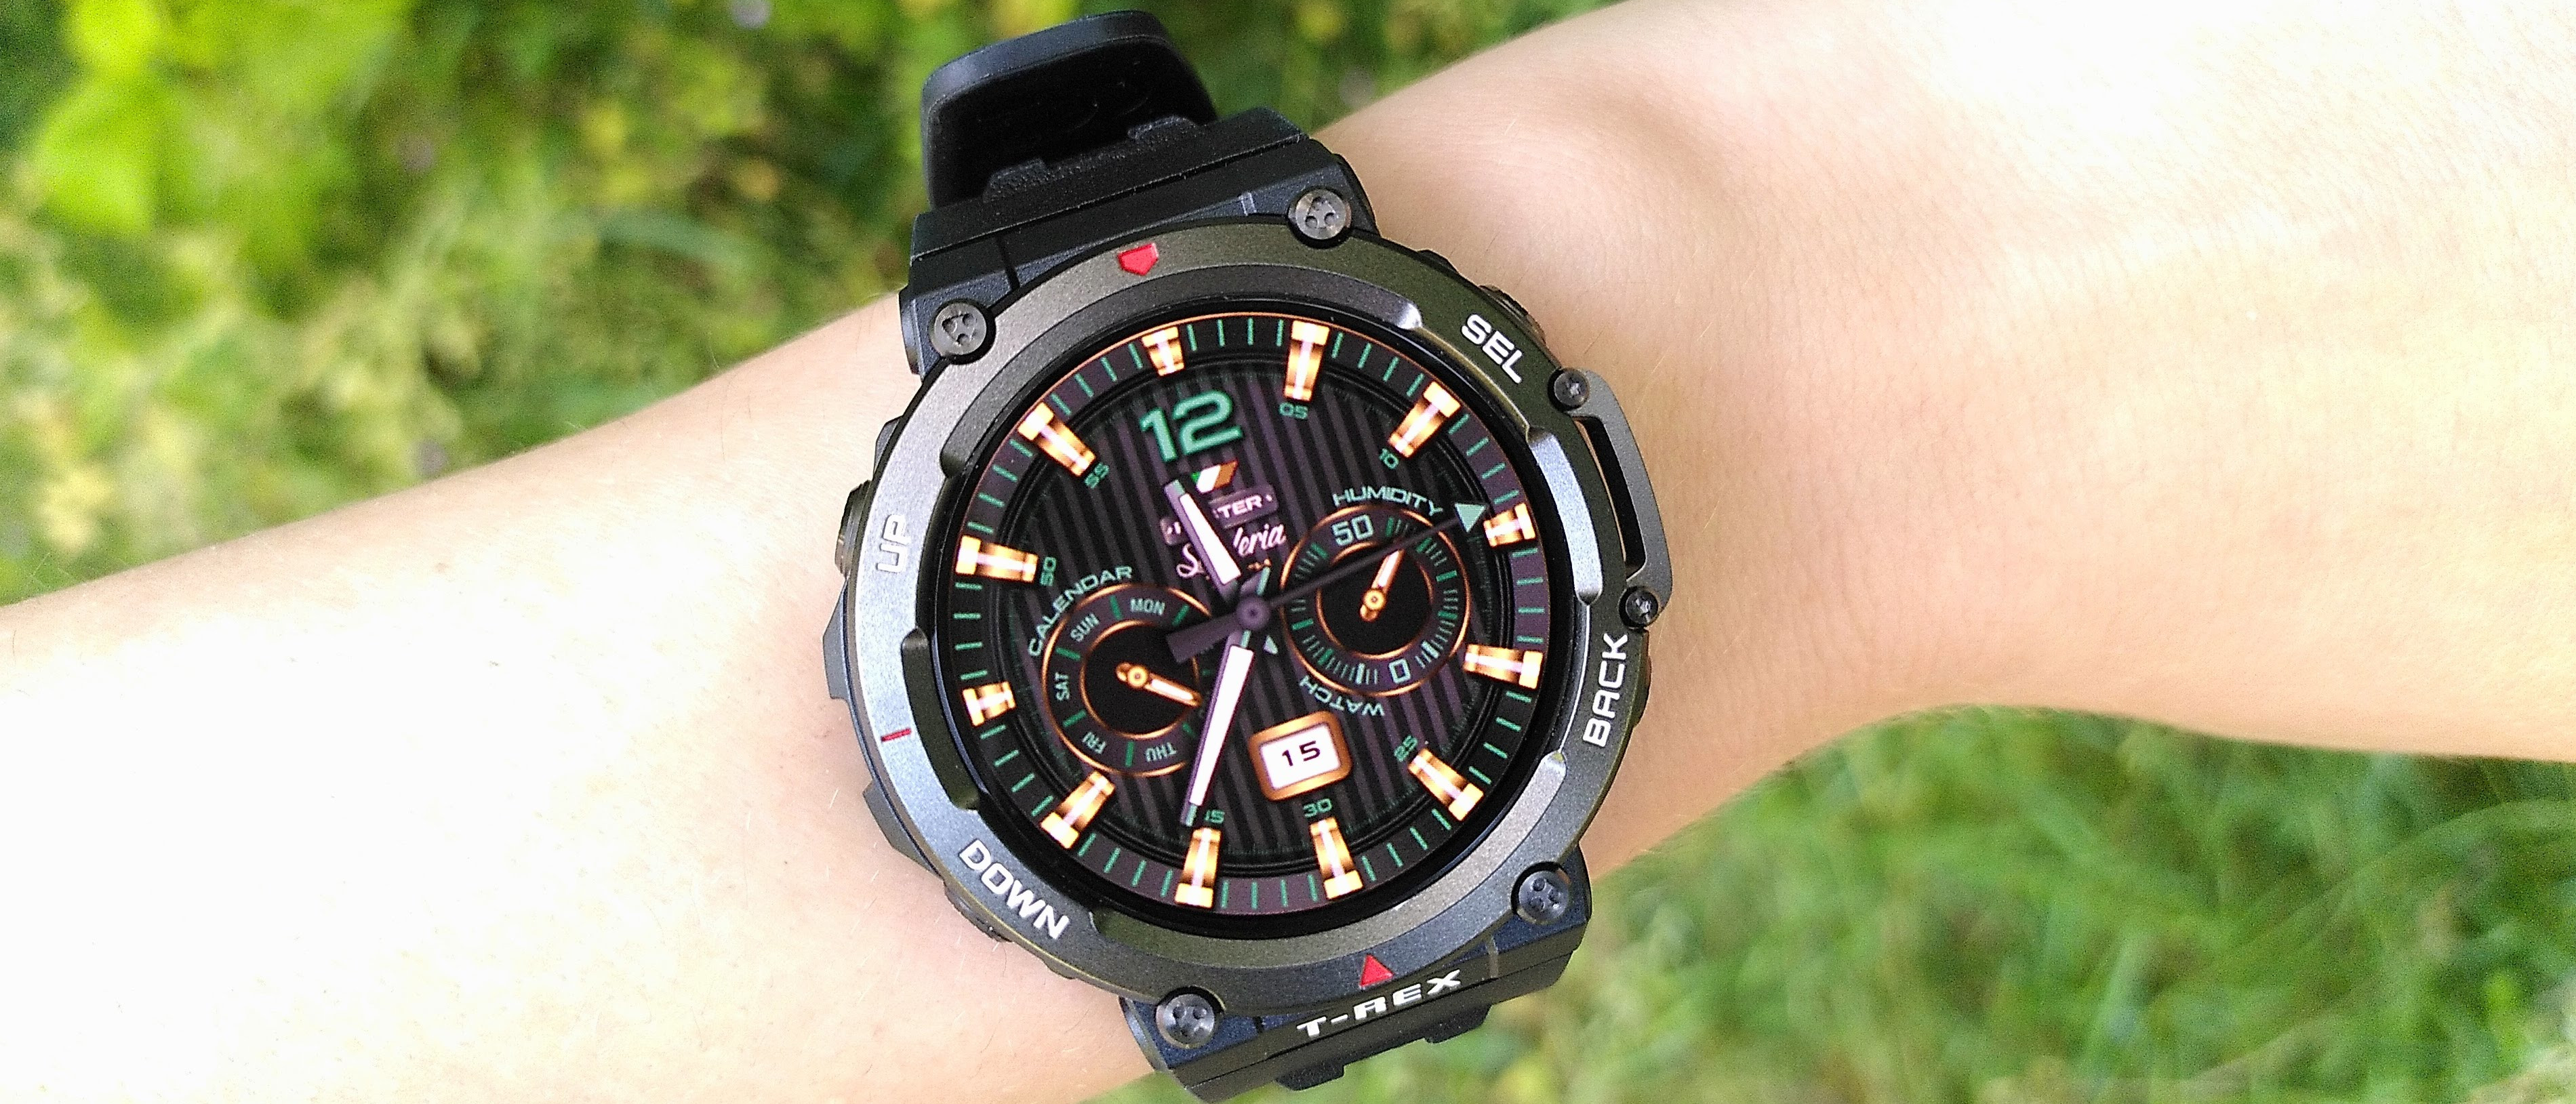 Amazfit T-Rex 2 review – a feature packed rugged smartwatch